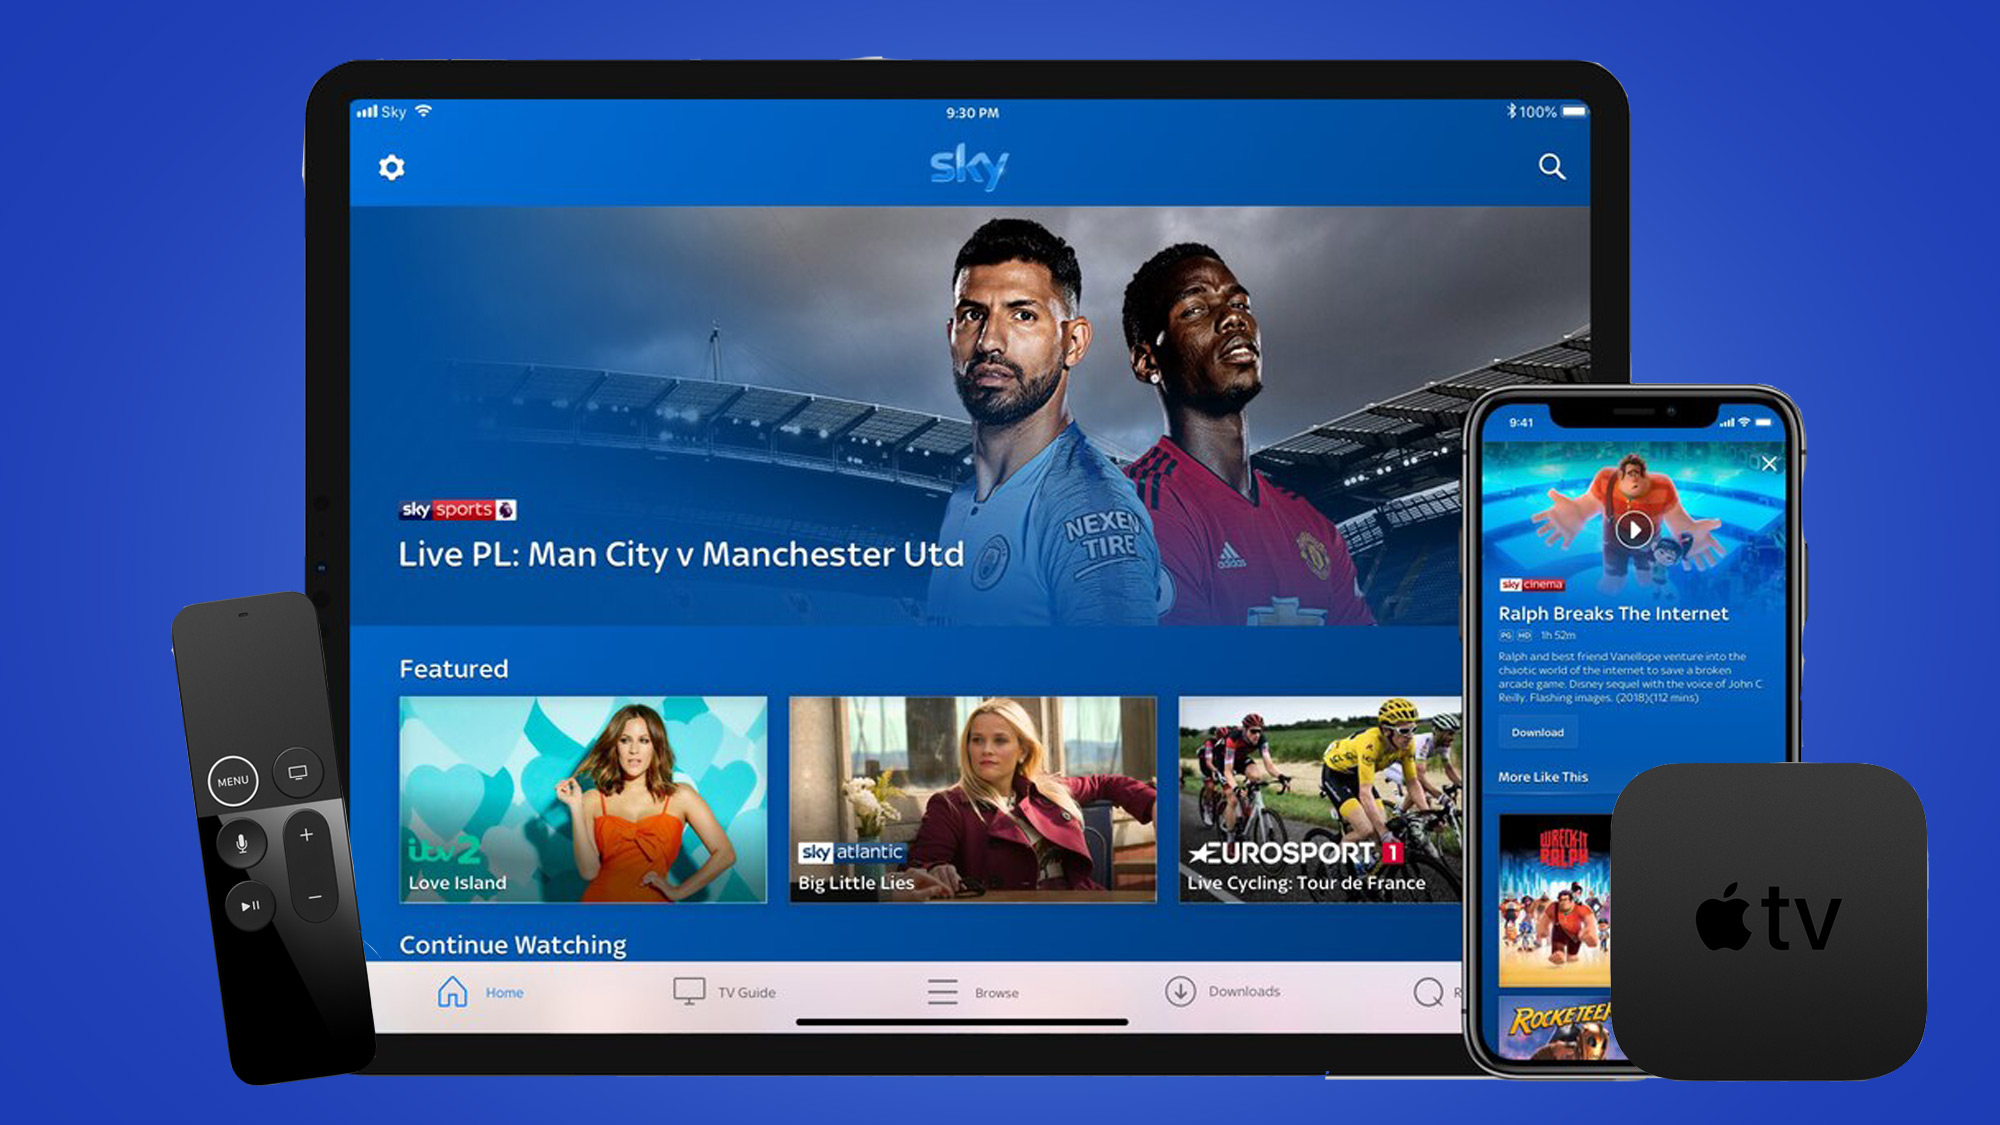 Sky Go On Apple Tv How To Watch, Can You Mirror Skygo From Ipad To Apple Tv